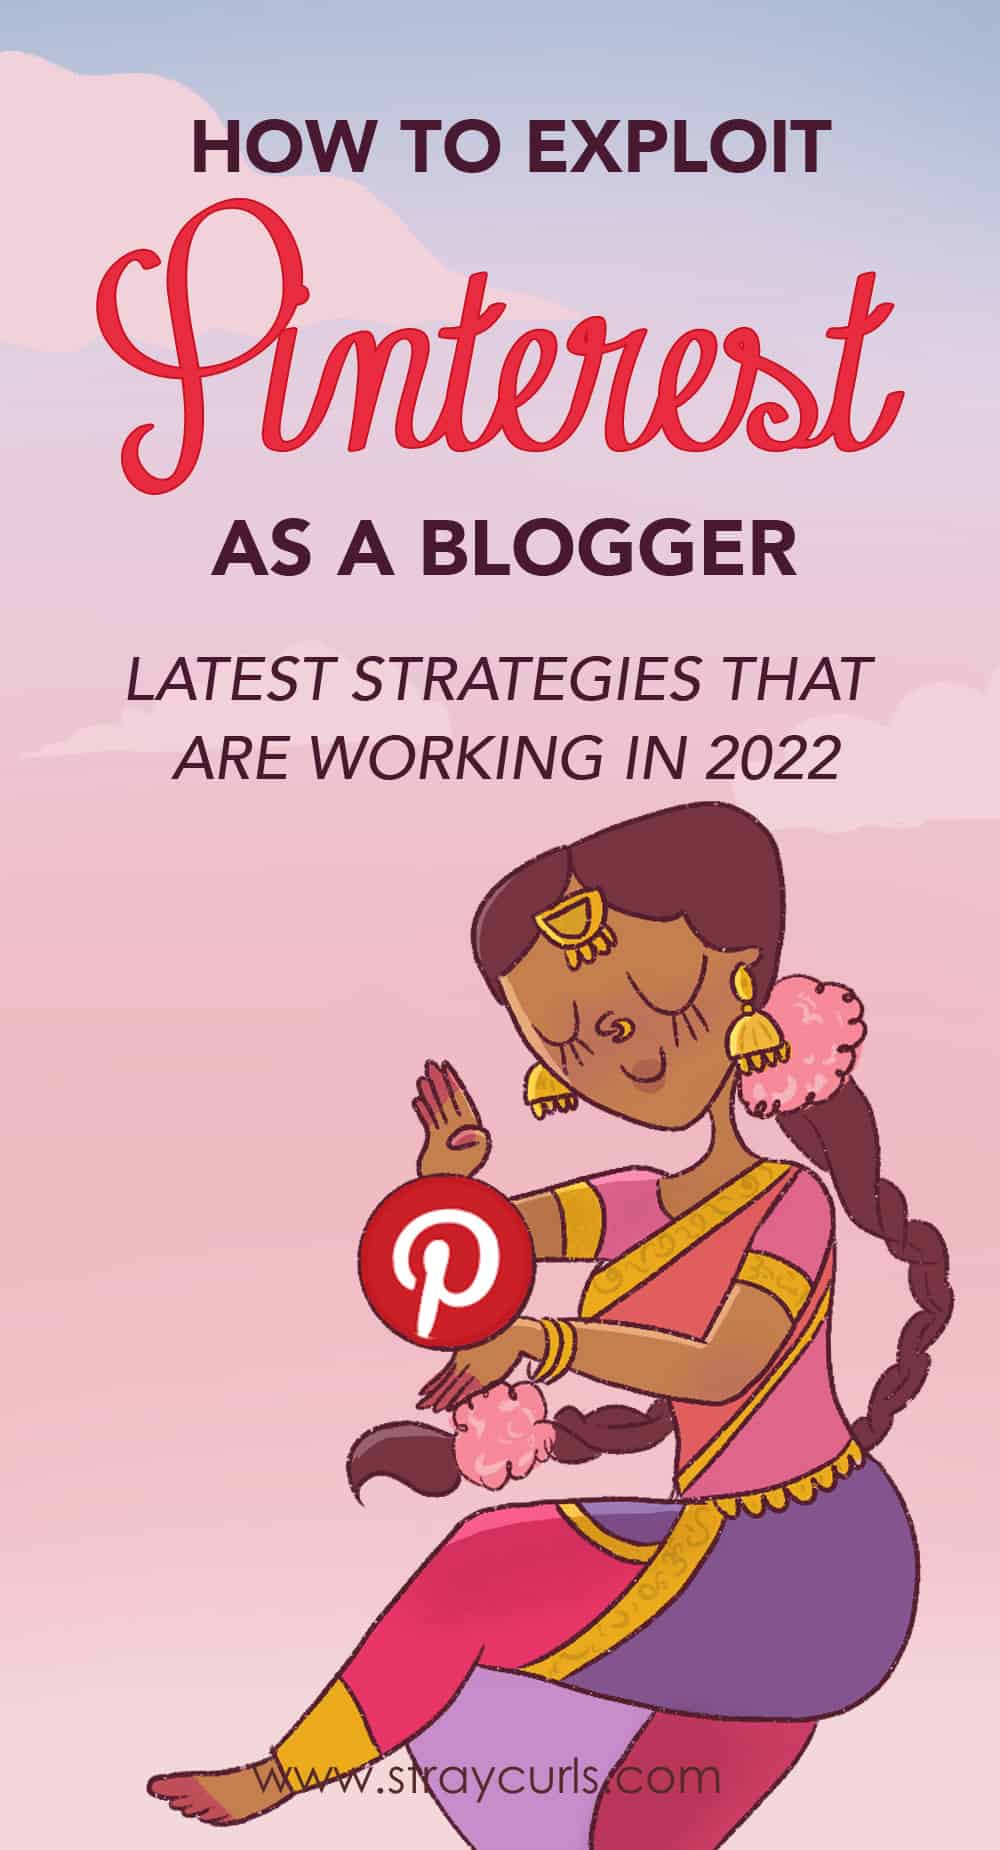 Struggling with pinterest marketing right now? This pinterest guide is the ultimate guide that covers pinterest for bloggers. Learn the pinterest strategies that are currently working and how they will help you get more blog traffic. #pinterestmarketing #pinterest #pintereststrategis #pintereststrategiesforbloggers